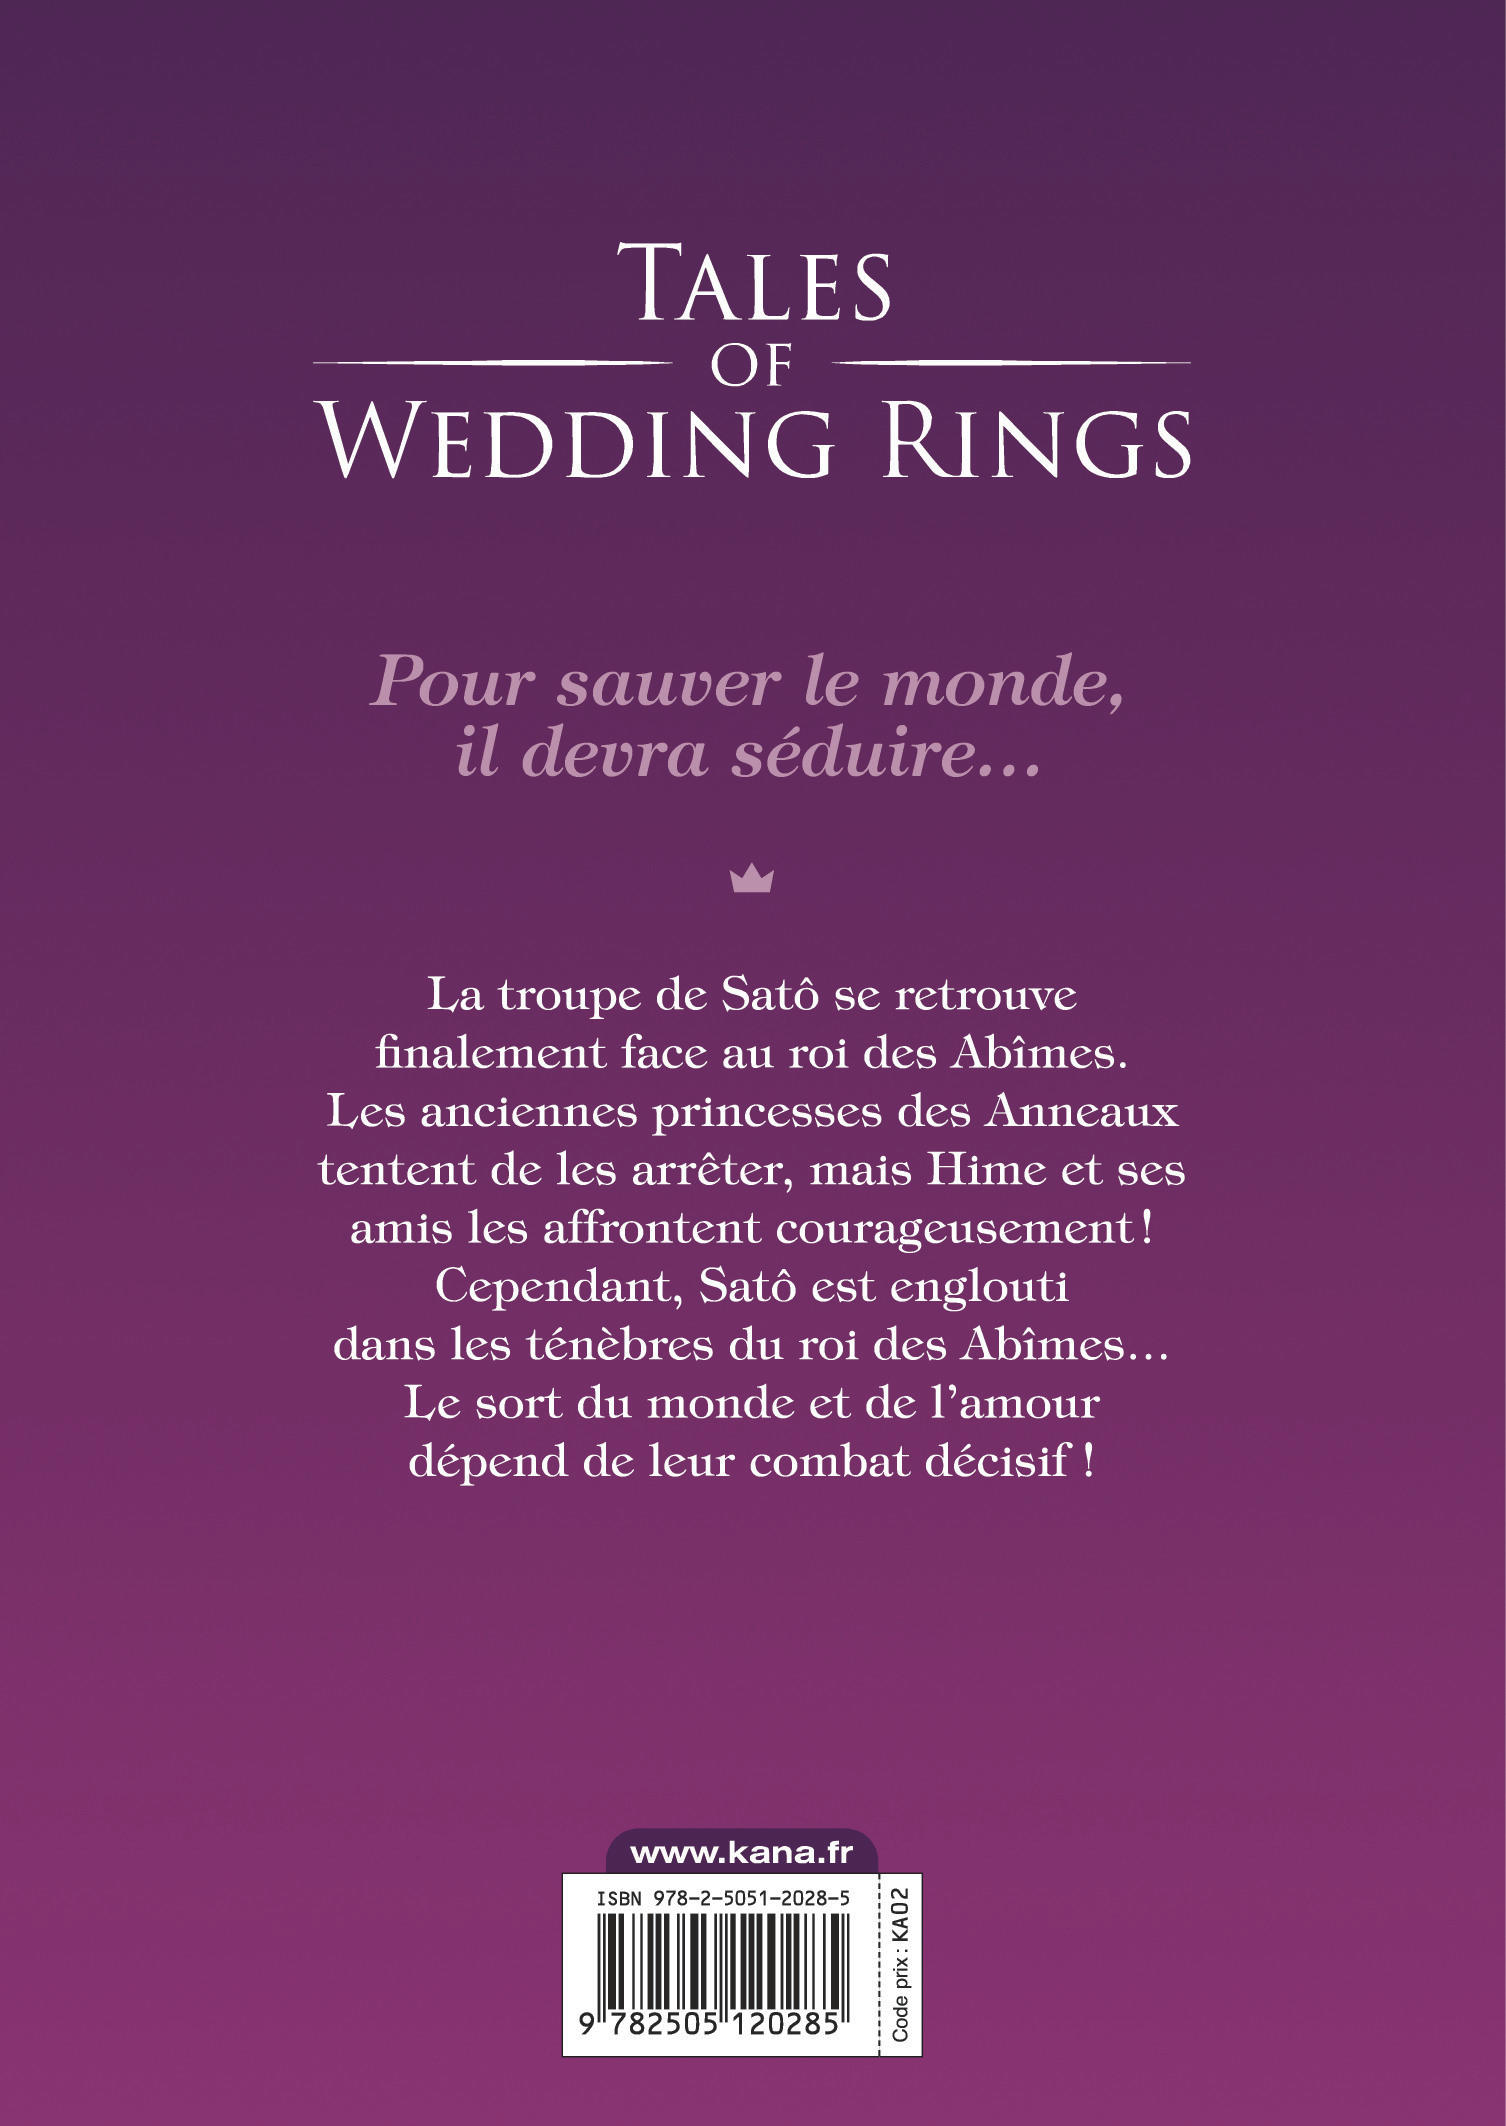 Tales of wedding rings – Tome 12 - 4eme